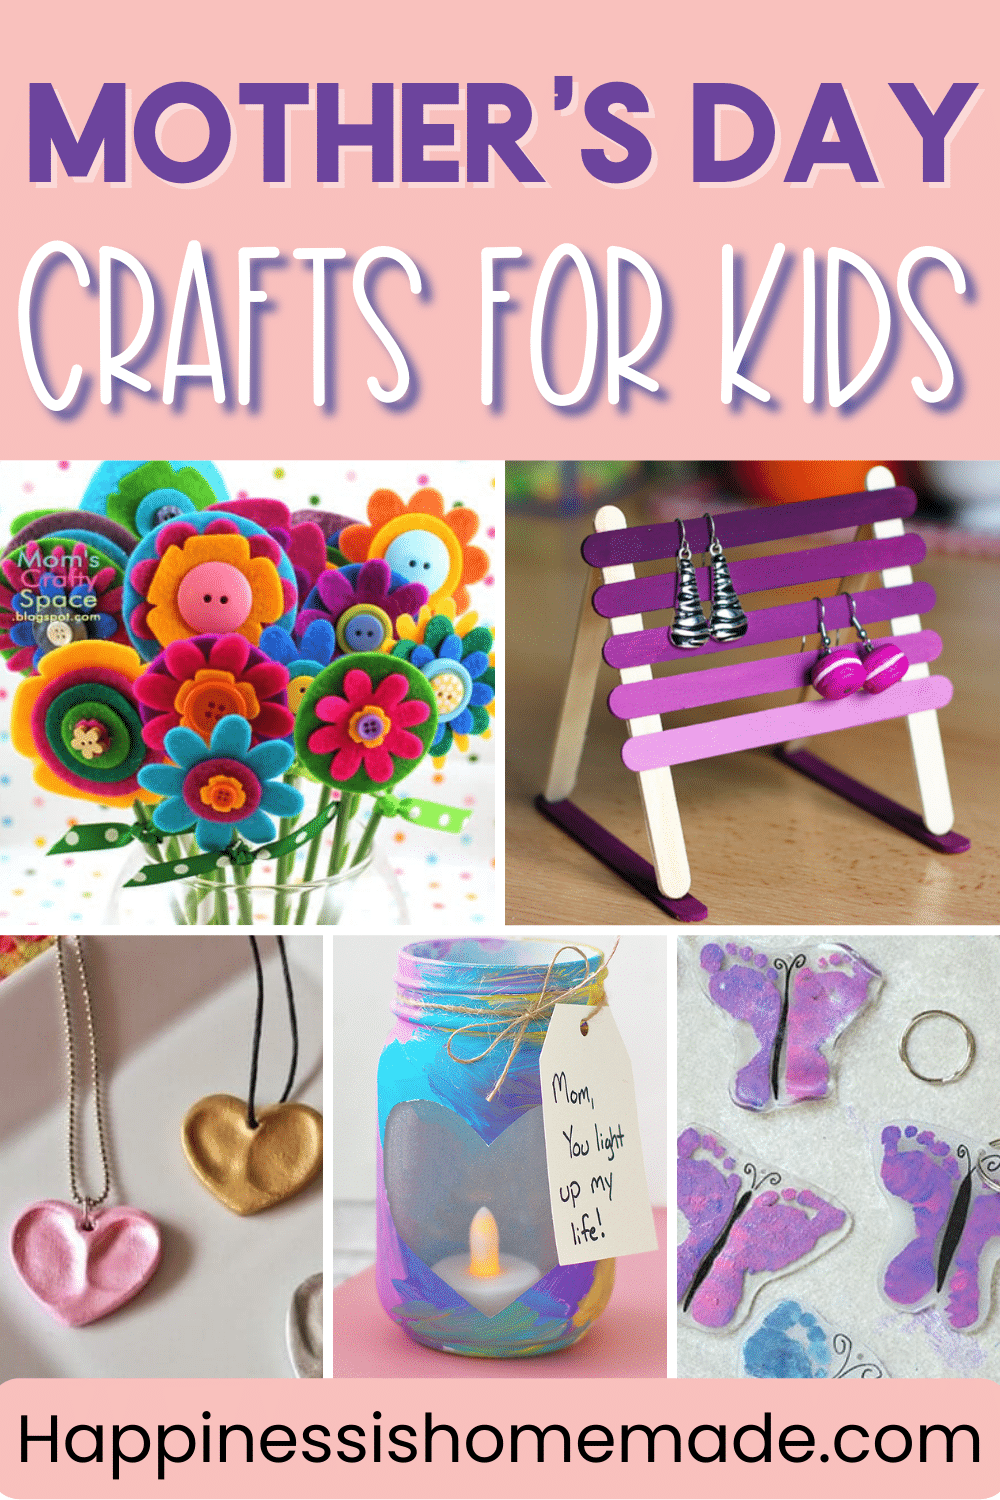 https://www.happinessishomemade.net/wp-content/uploads/2018/04/Mothers-Day-Crafts-For-Kids-Pin-1.png